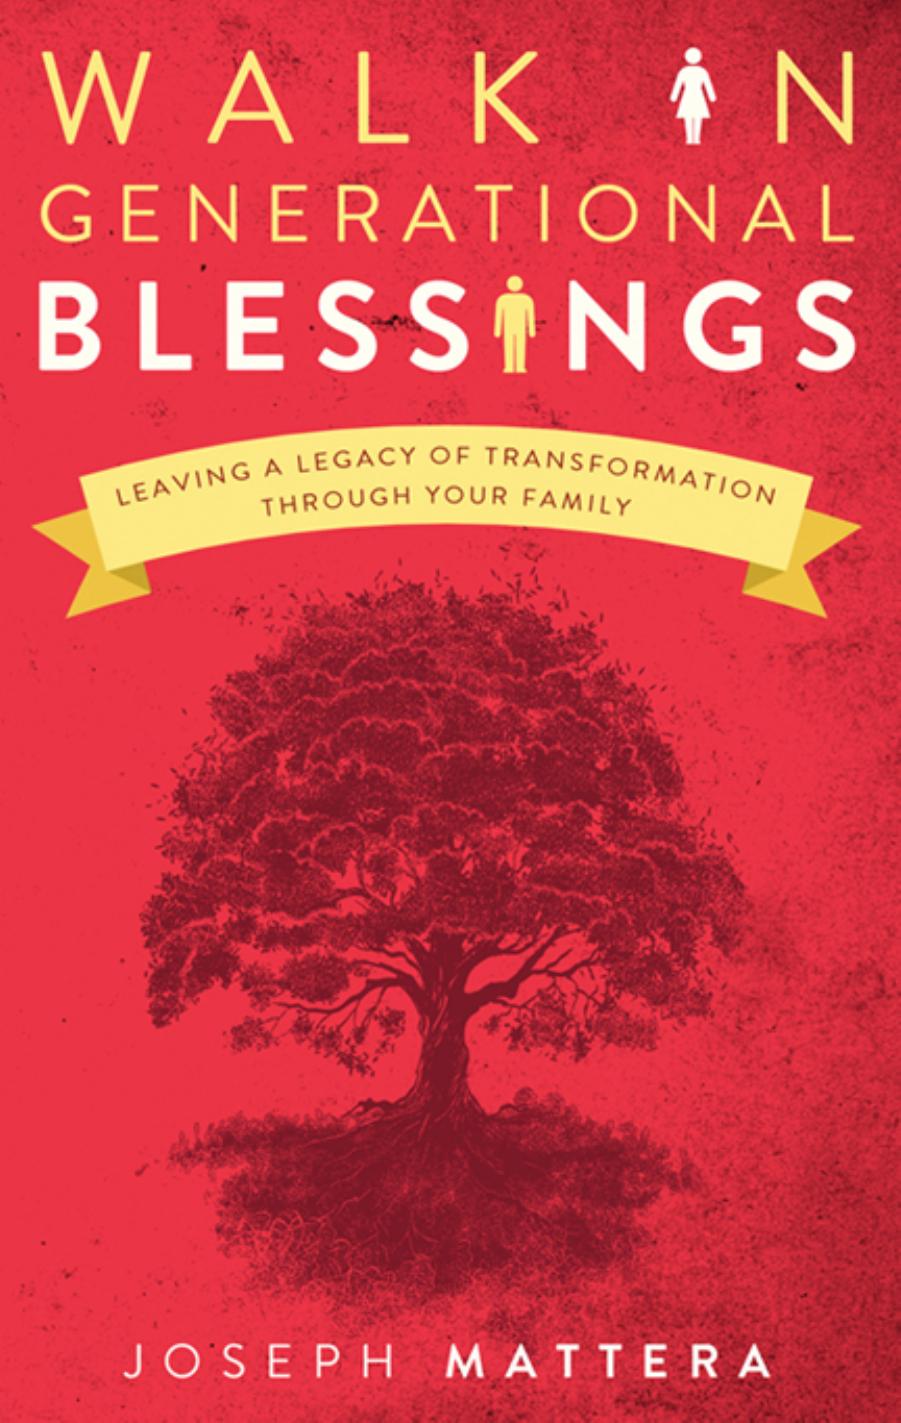 Walk in Generational Blessings: Leaving a Legacy of Transformation Through Your Family by Joseph Mattera